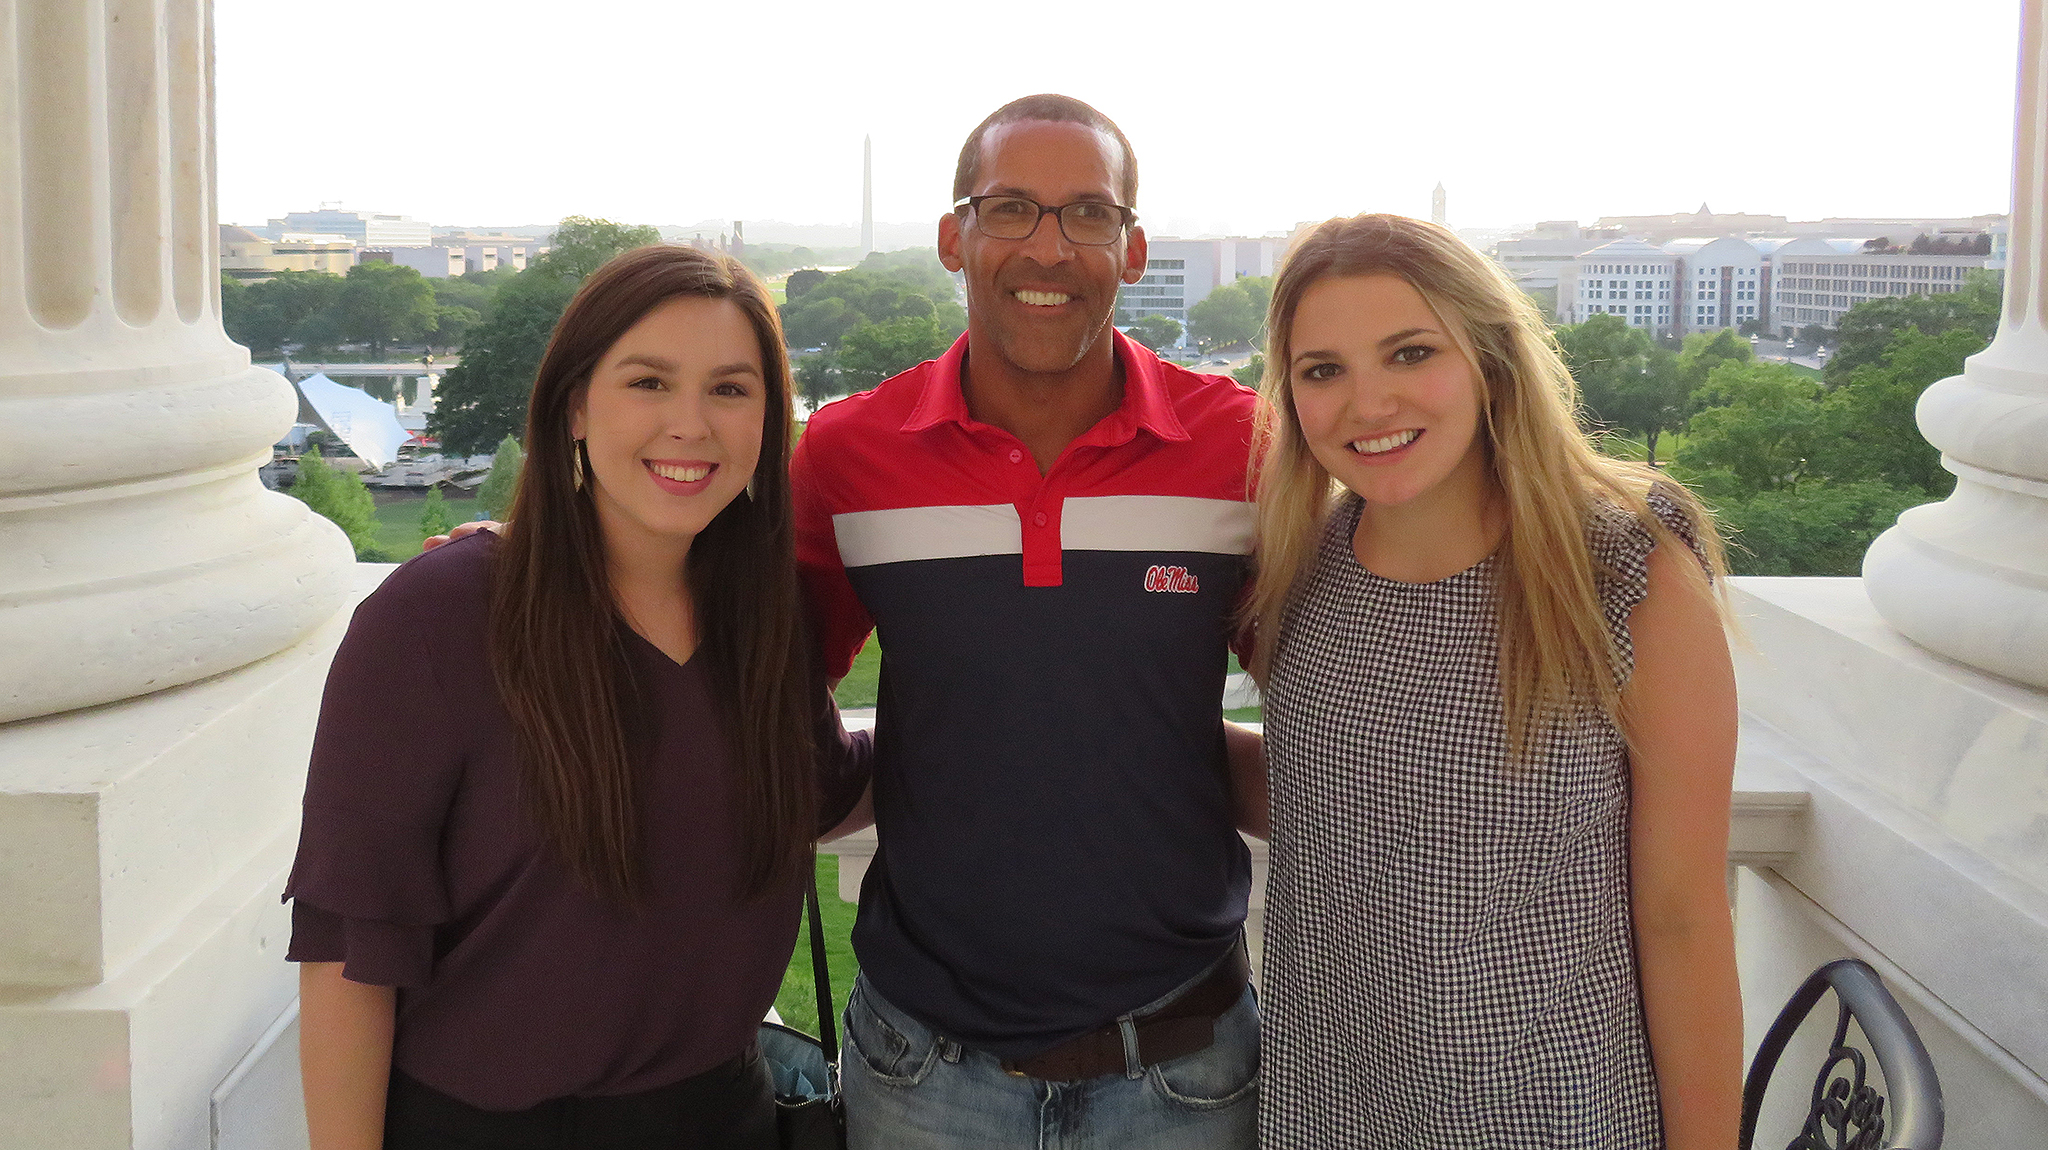 Political science professor Marvin King (center) and Ole Miss students Ashley Miles (left) and Hannah Chauvin visit the U.S. Capitol while in Washington for a Study USA course. Submitted photo